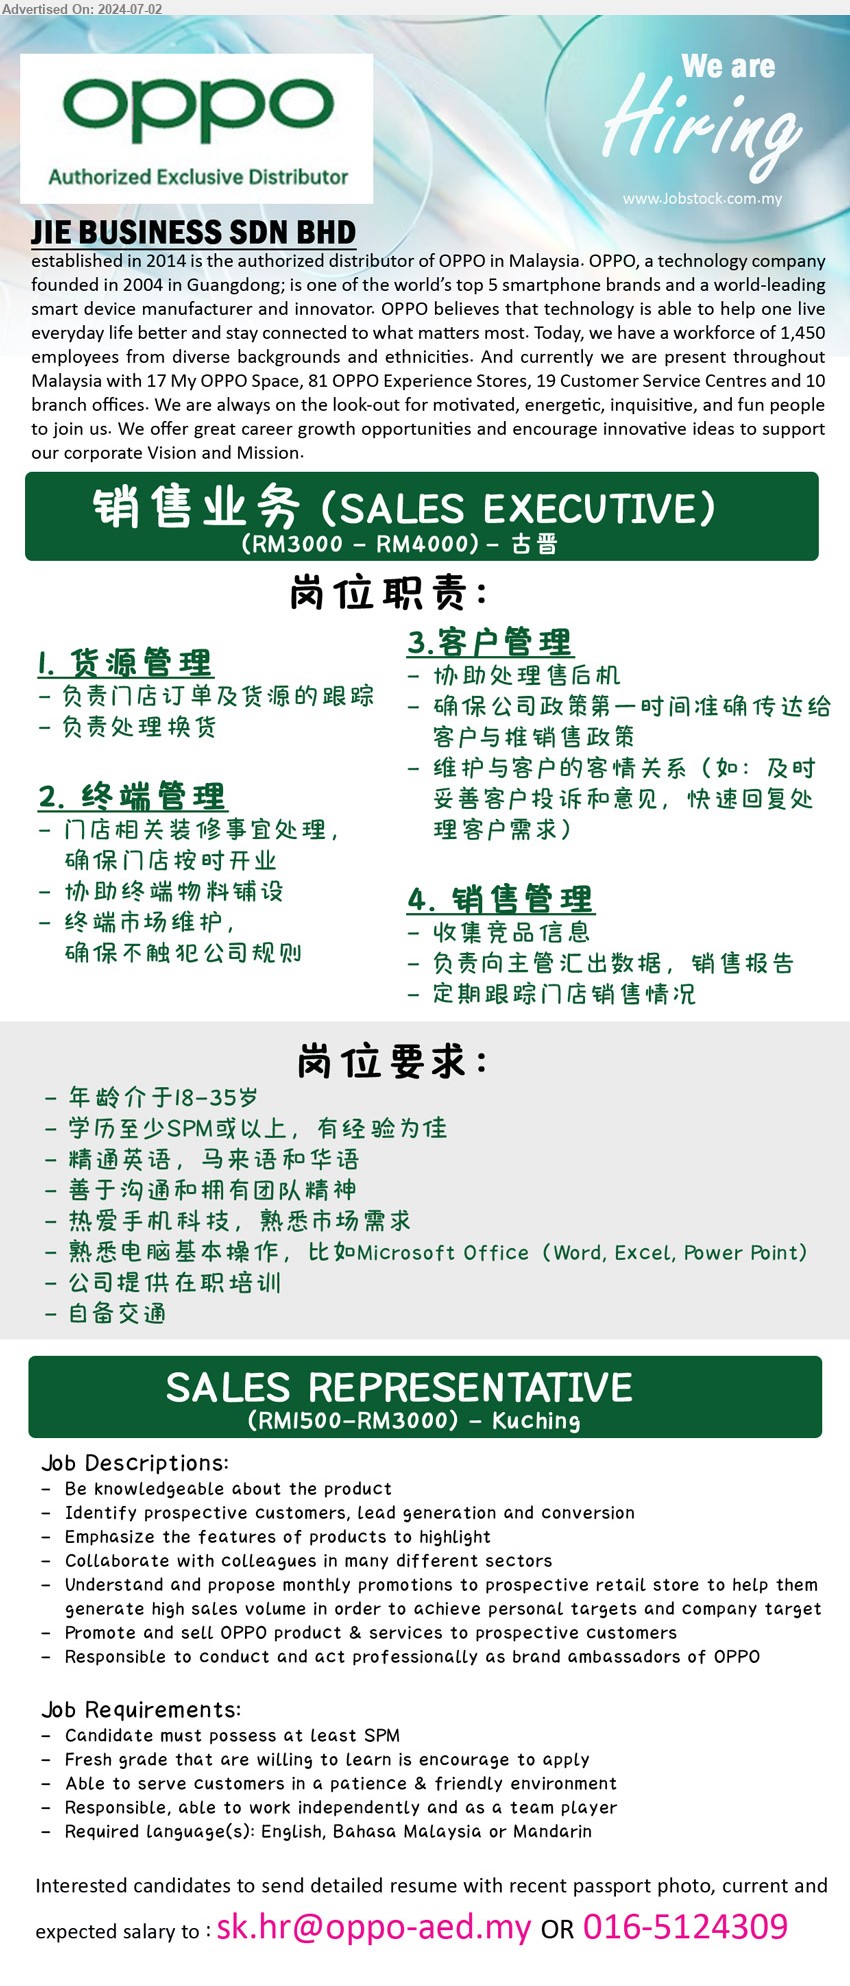 JIE BUSINESS SDN BHD - 1. 销售业务 (SALES EXECUTIVE)  (Kuching), RM3000 - RM4000,  学历至少SPM或以上，有经验为佳, 熟悉电脑基本操作...
2. SALES REPRESENTATIVE (Kuching), RM1500-RM3000, SPM, Fresh grade that are willing to learn is encourage to apply...
Call 016-5124309 / Email resume to ...